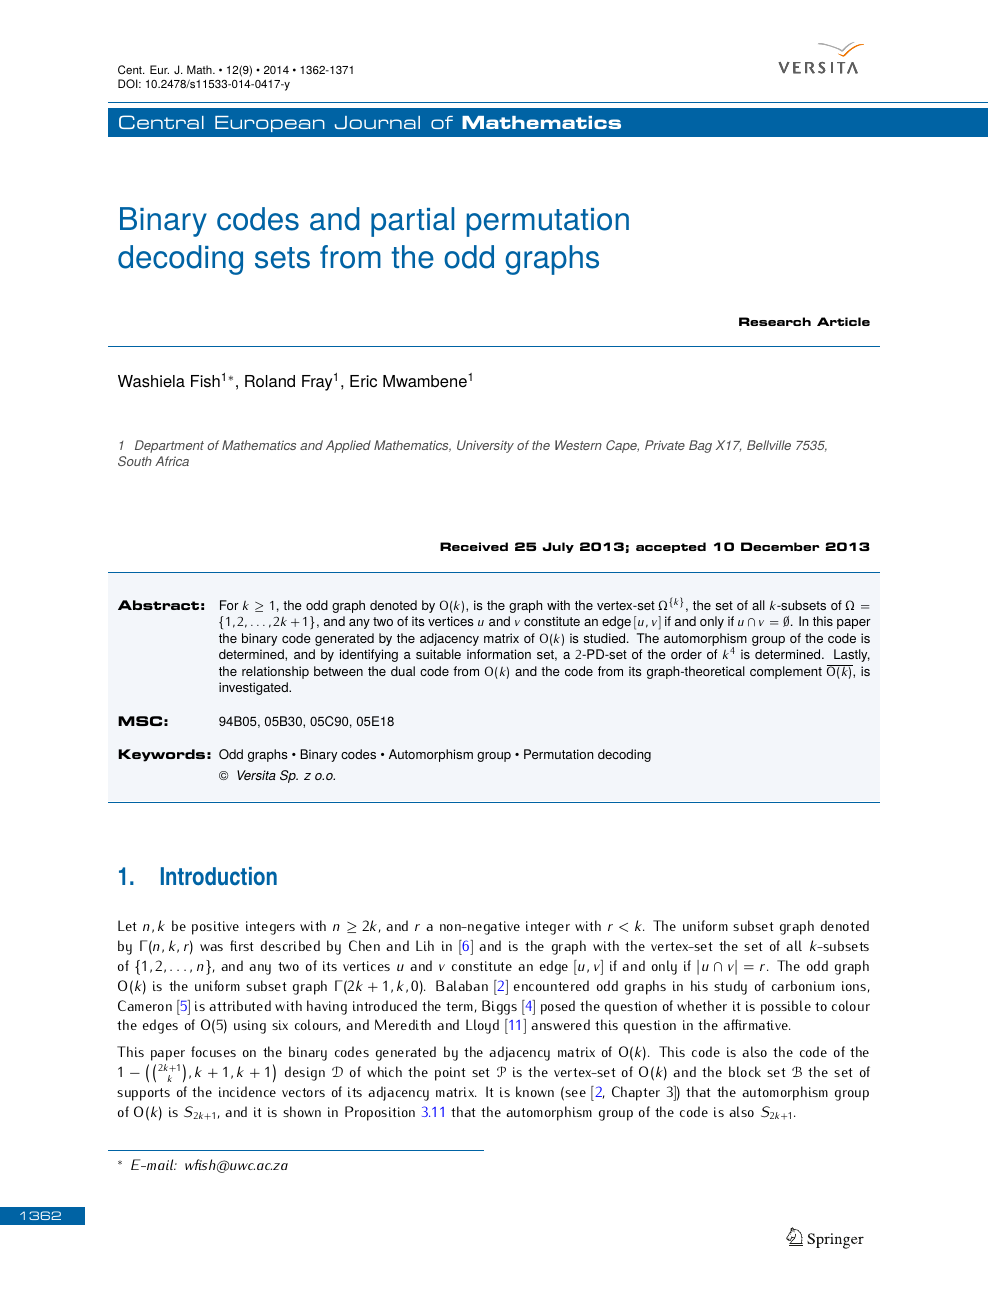 Binary Codes And Partial Permutation Decoding Sets From The Odd Graphs Topic Of Research Paper In Mathematics Download Scholarly Article Pdf And Read For Free On Cyberleninka Open Science Hub